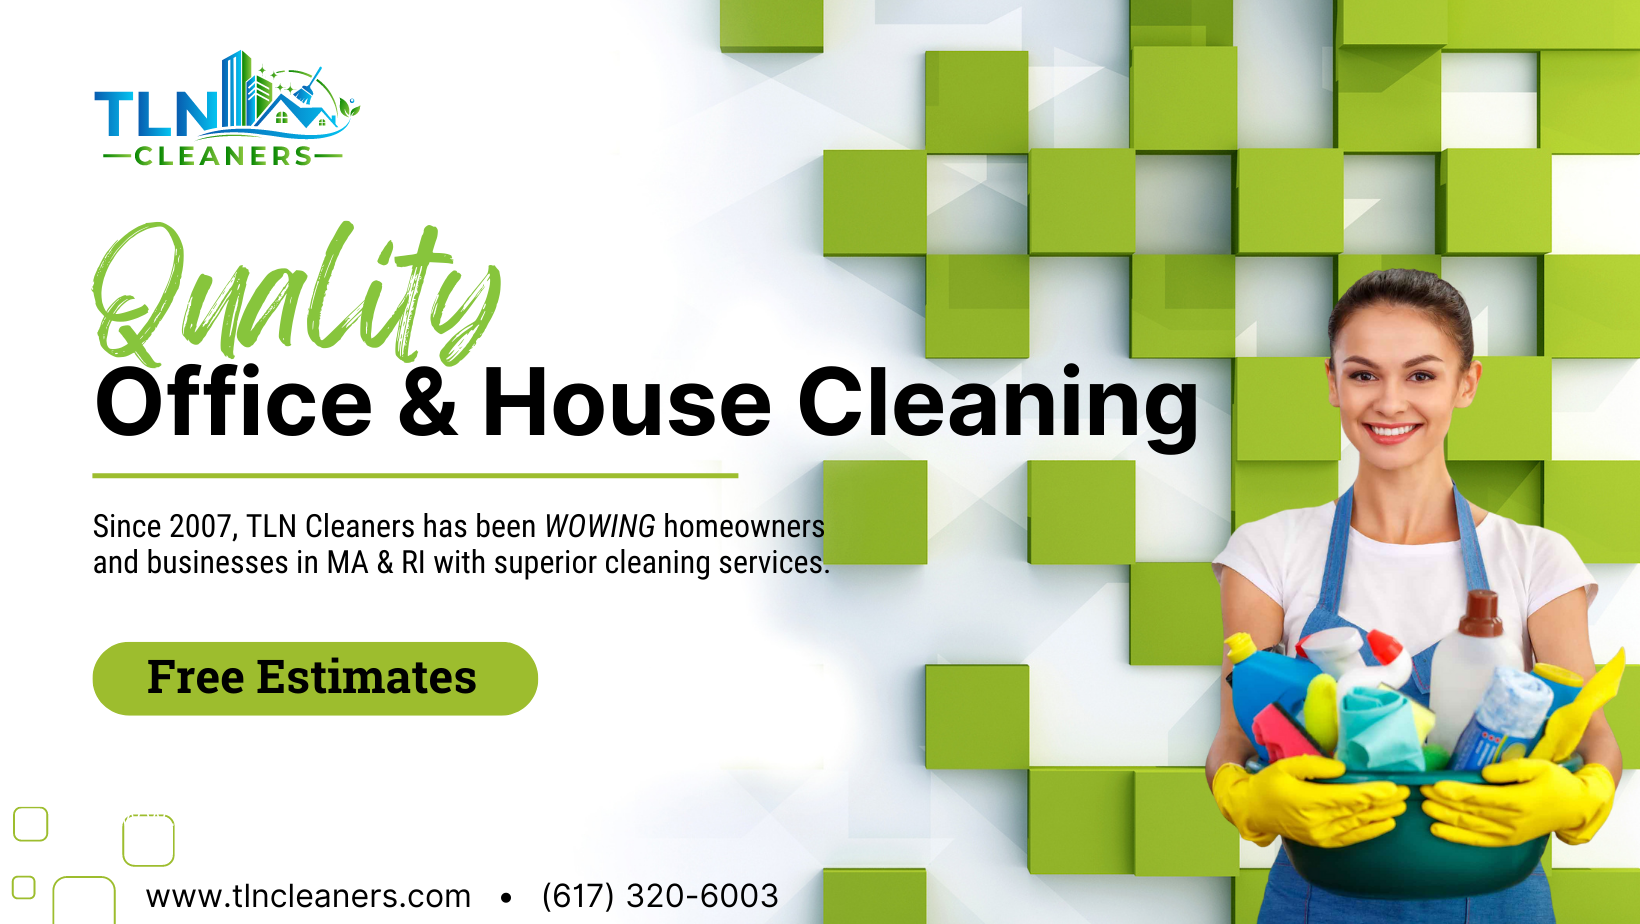 TLN Cleaners, Attleboro, MA Office & House Cleansing Services Now Offering Holiday Deep Cleansing Services For Homes And Businesses Throughout Massachusetts